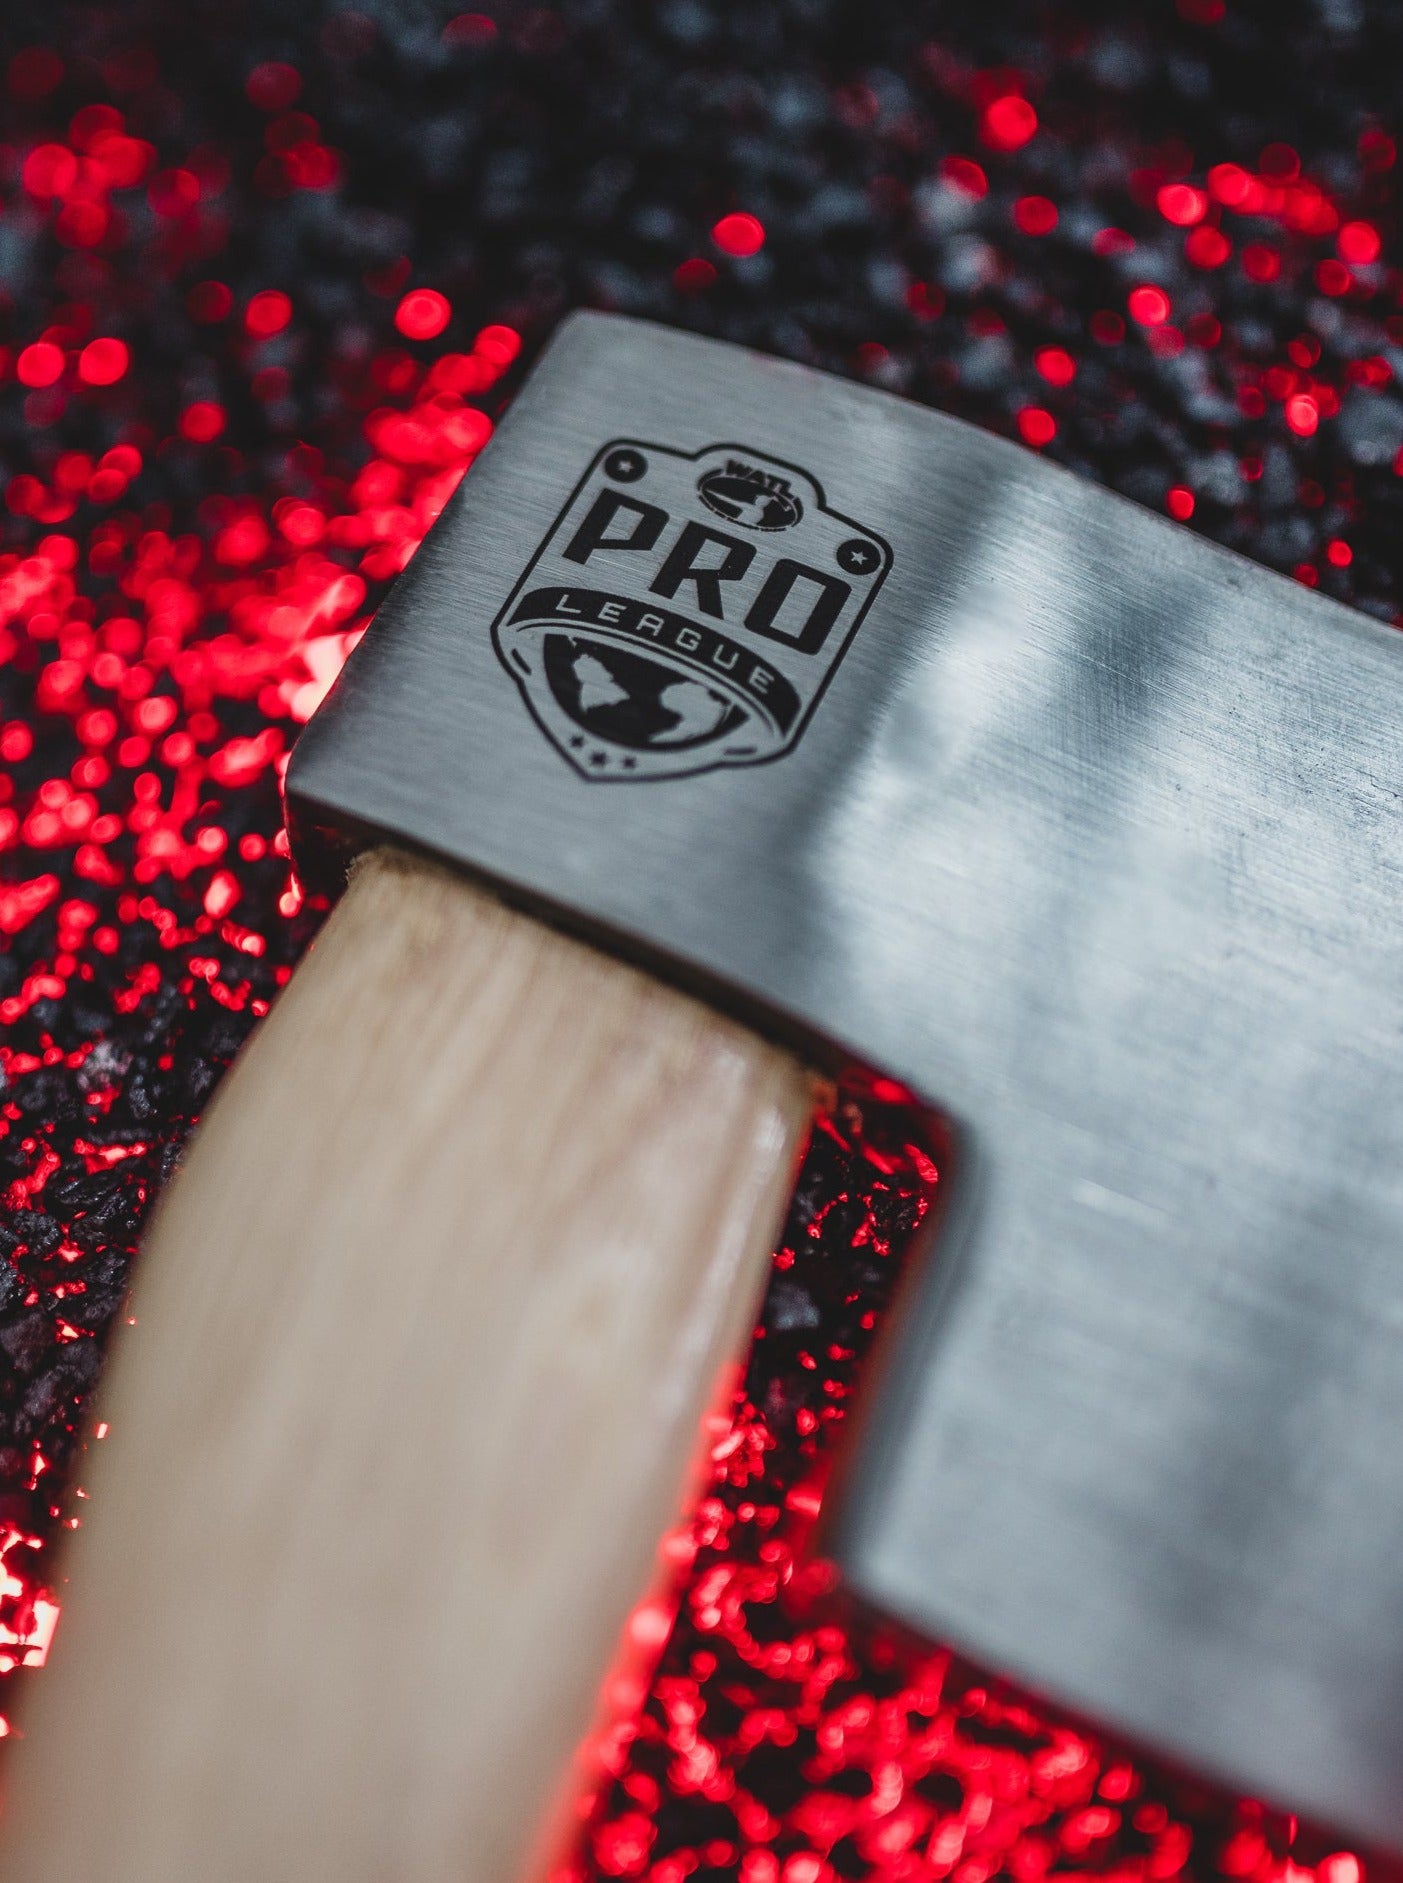 Throwing Axe with Pro League Engraving by World Axe Throwing League